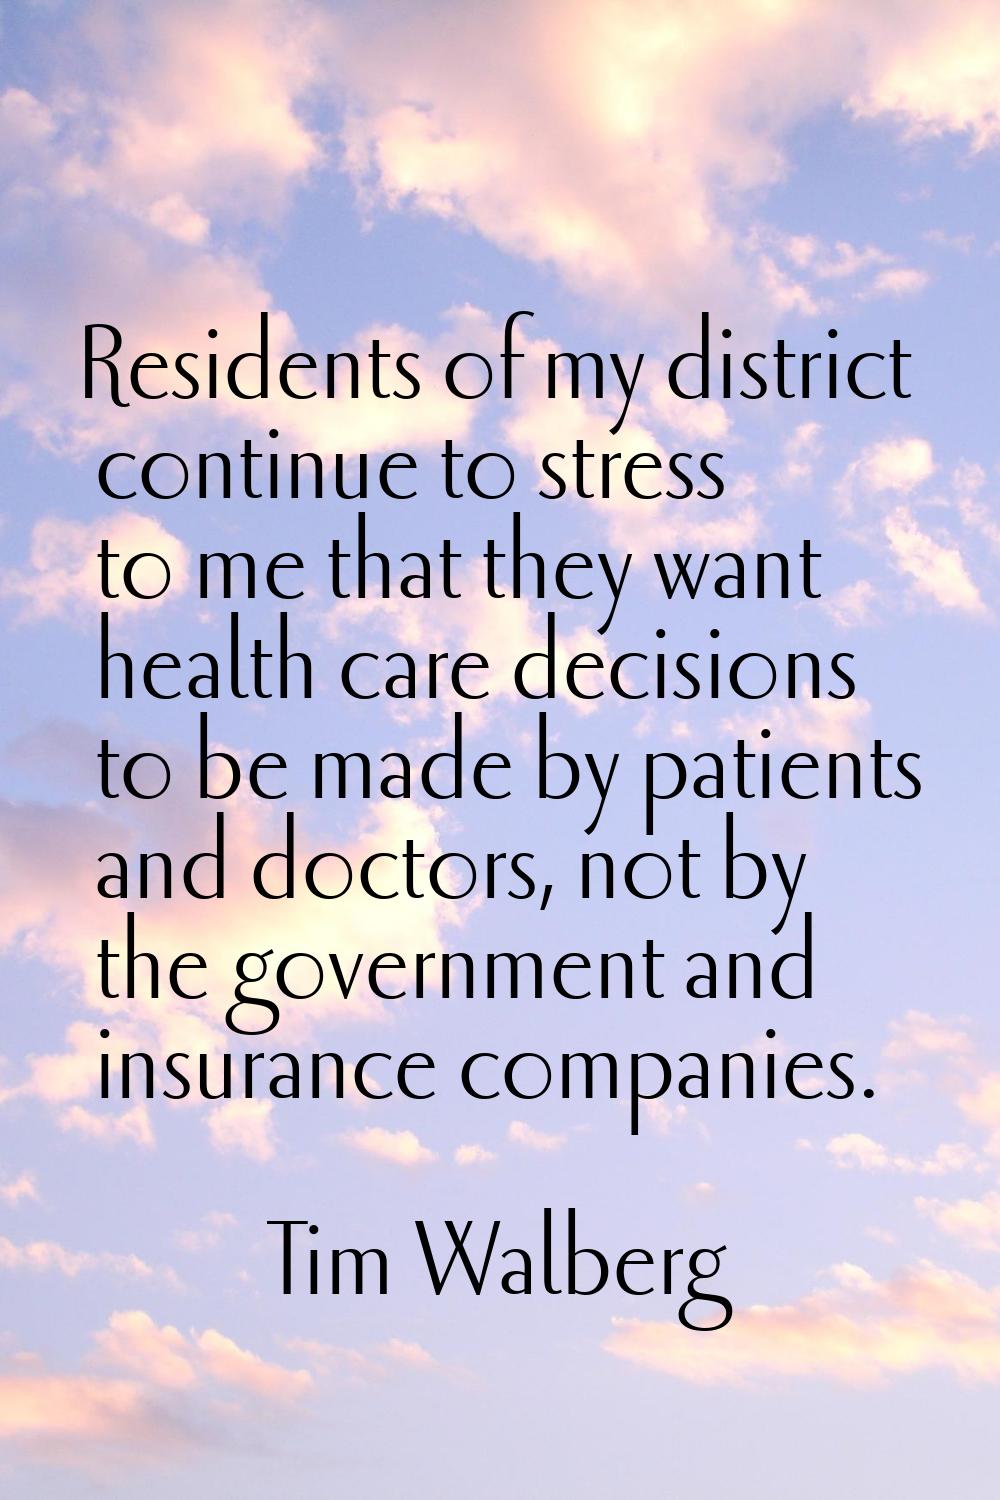 Residents of my district continue to stress to me that they want health care decisions to be made b